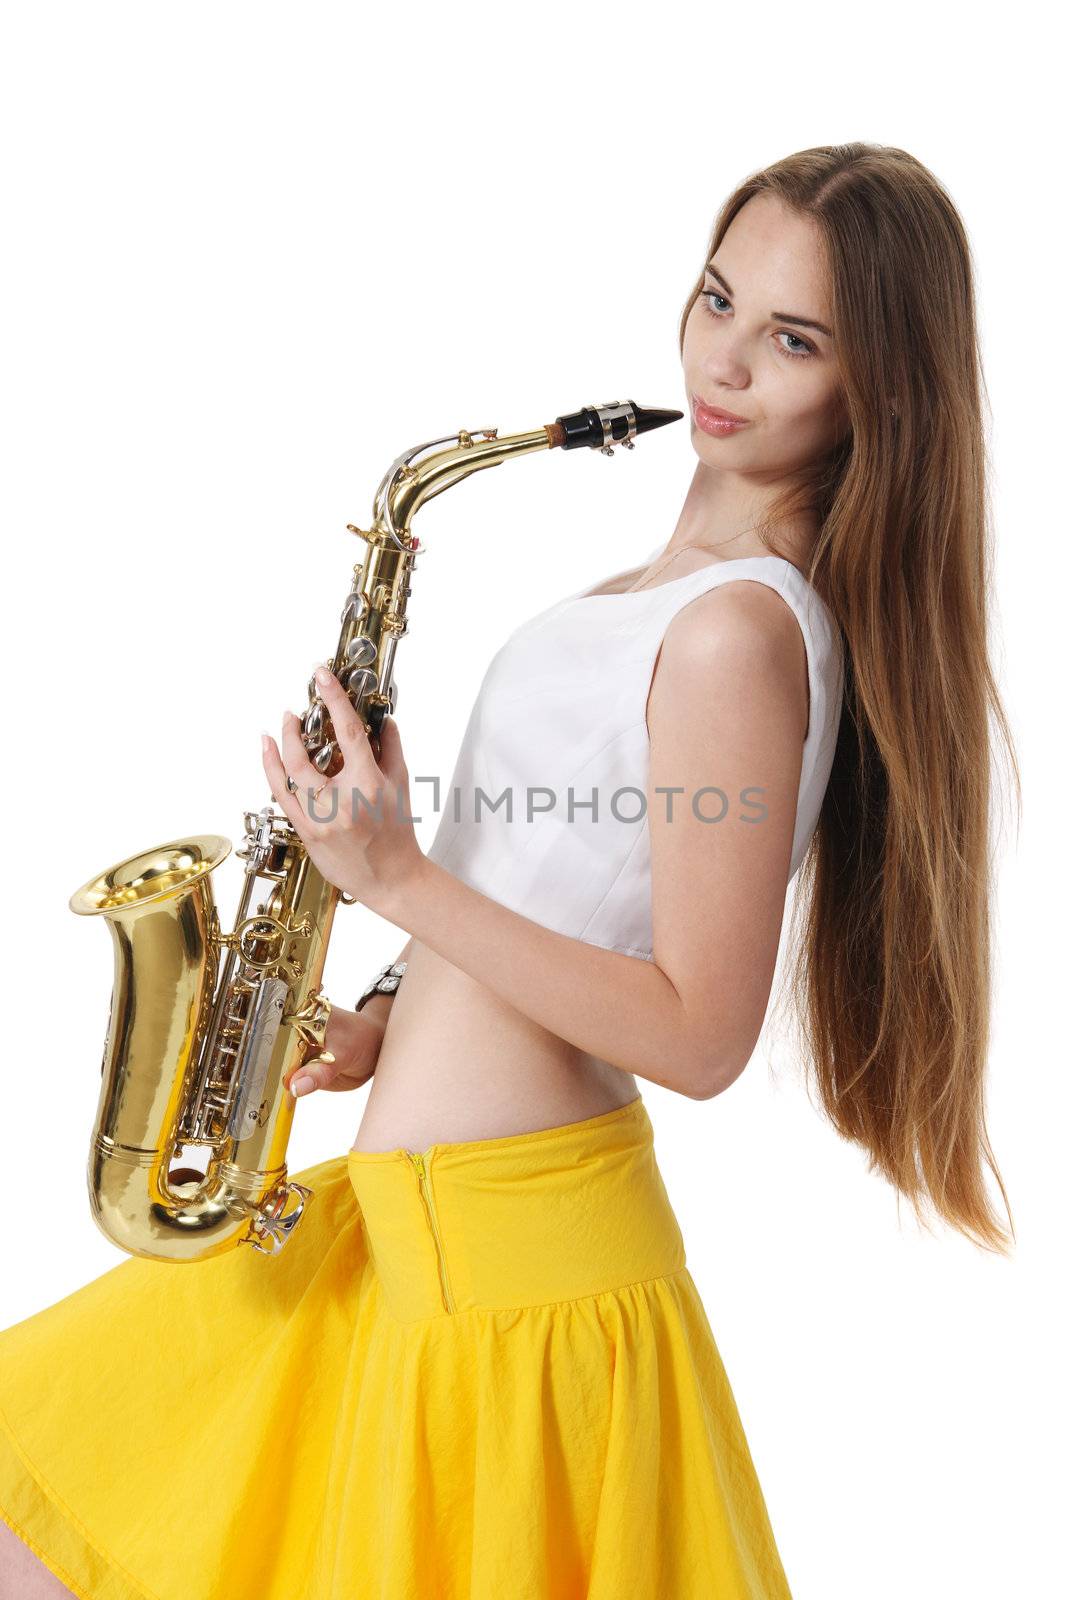 Girl with a sax musical instrument on tne white background